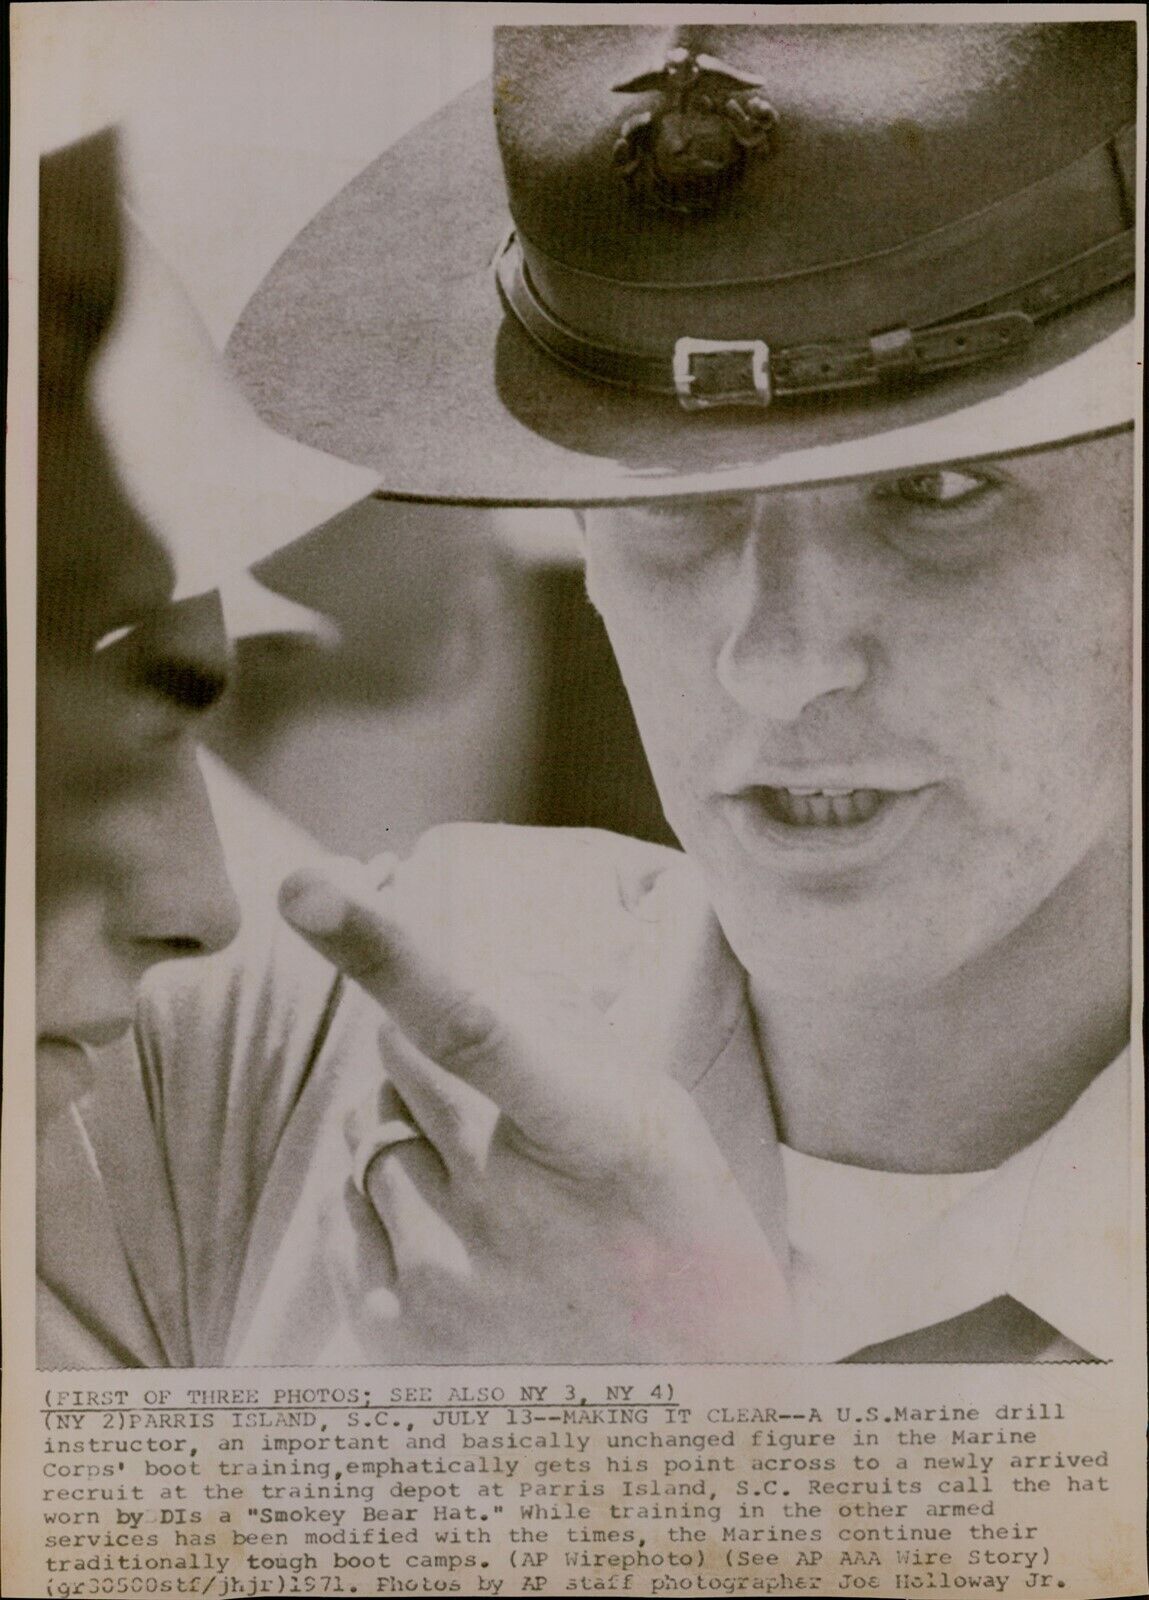 LG843 1971 Wire Photo MAKING IT CLEAR United States Marine Drill Instructor Yell